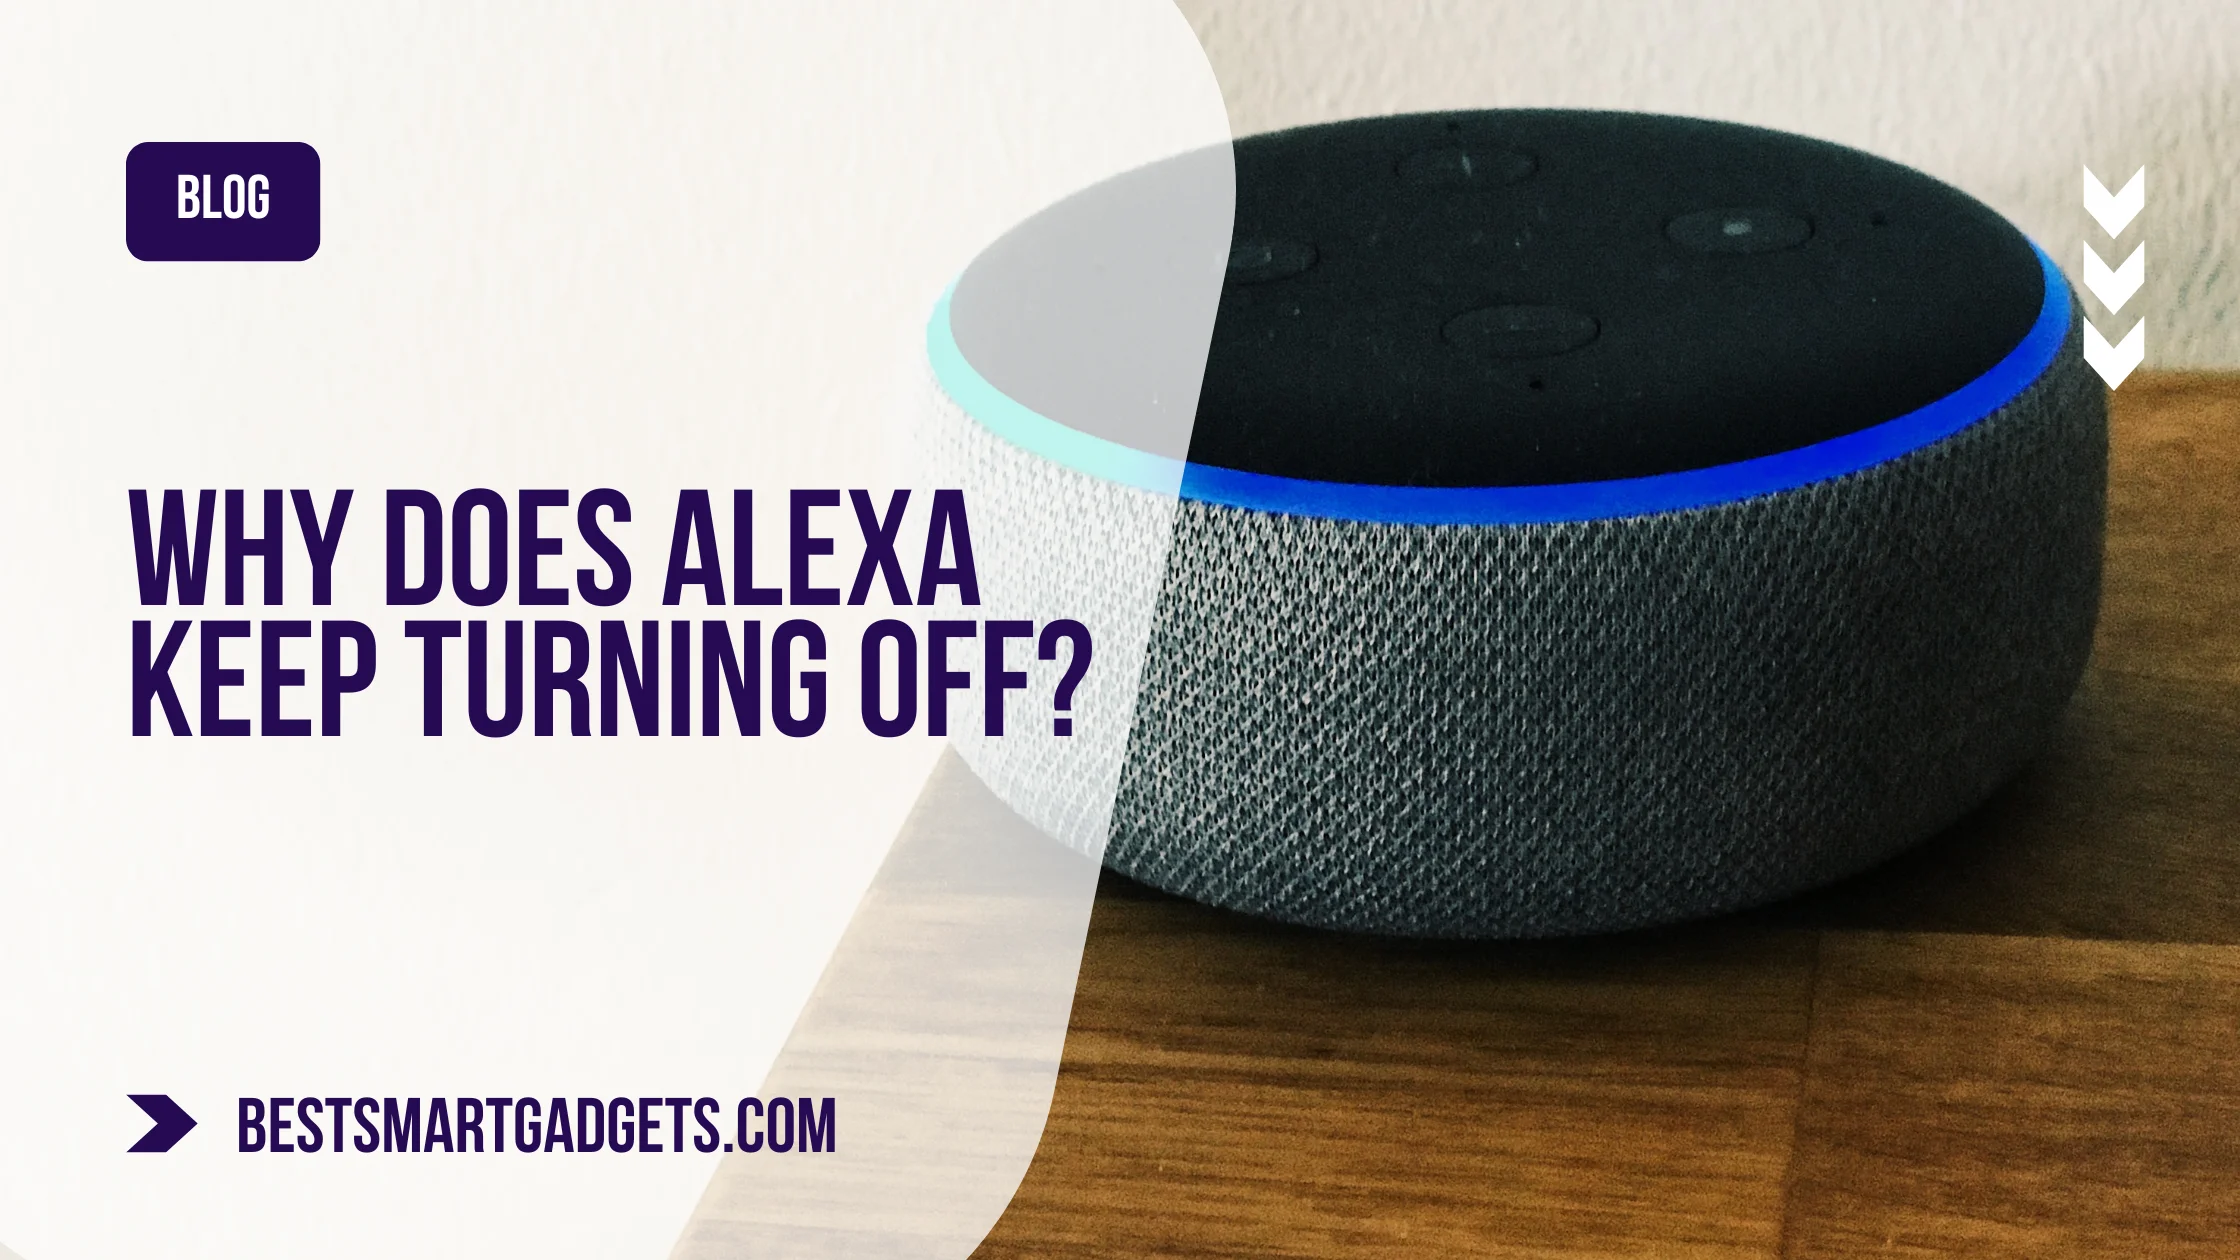 Why Does Alexa Keep Turning Off